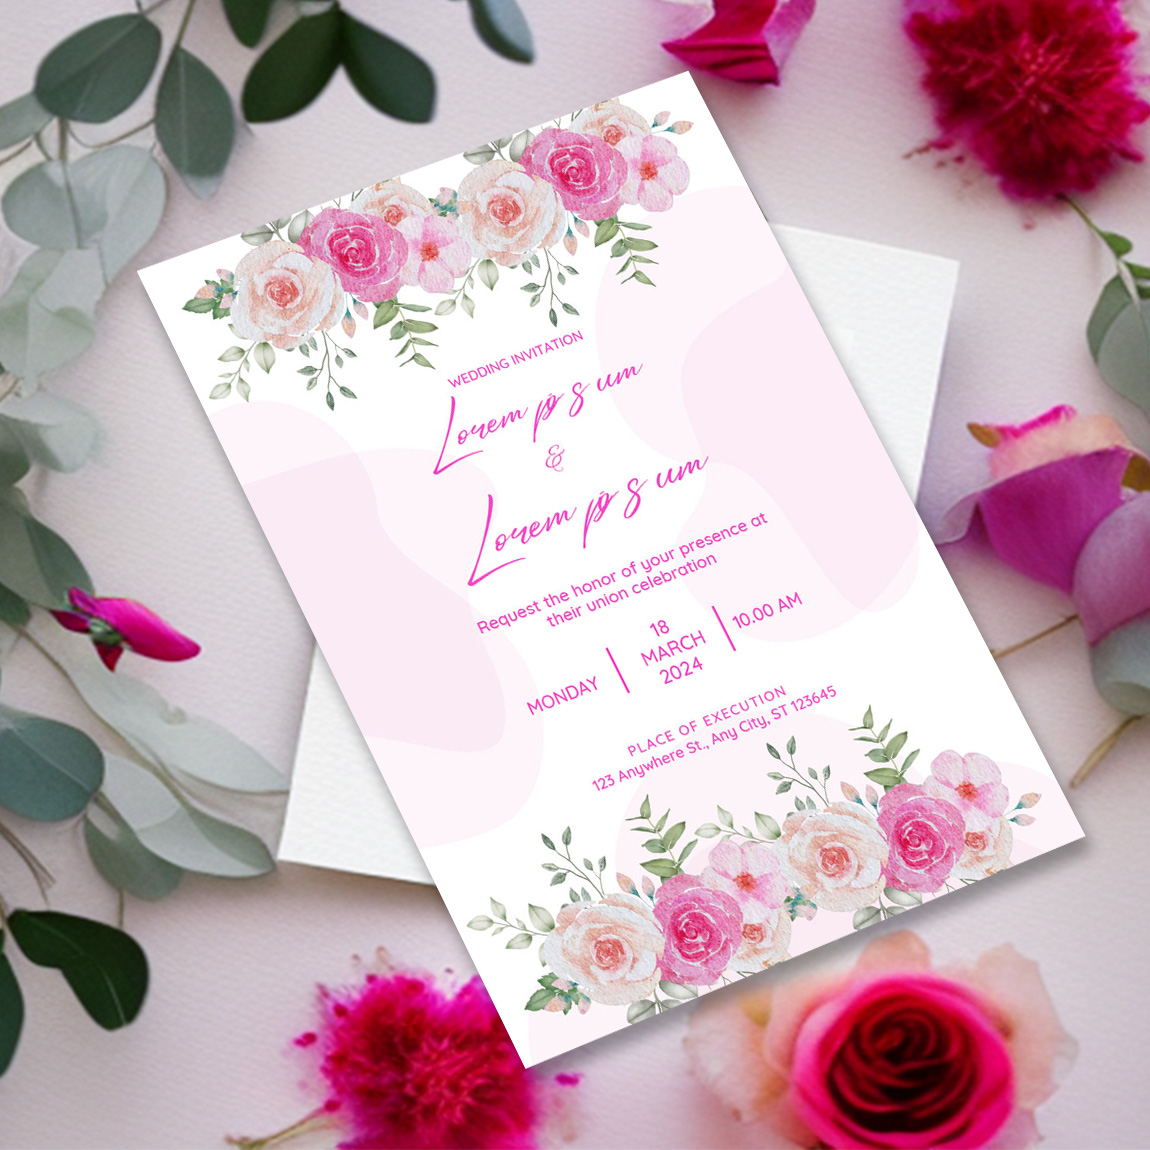 Image with enchanting wedding invitation with rose flowers.